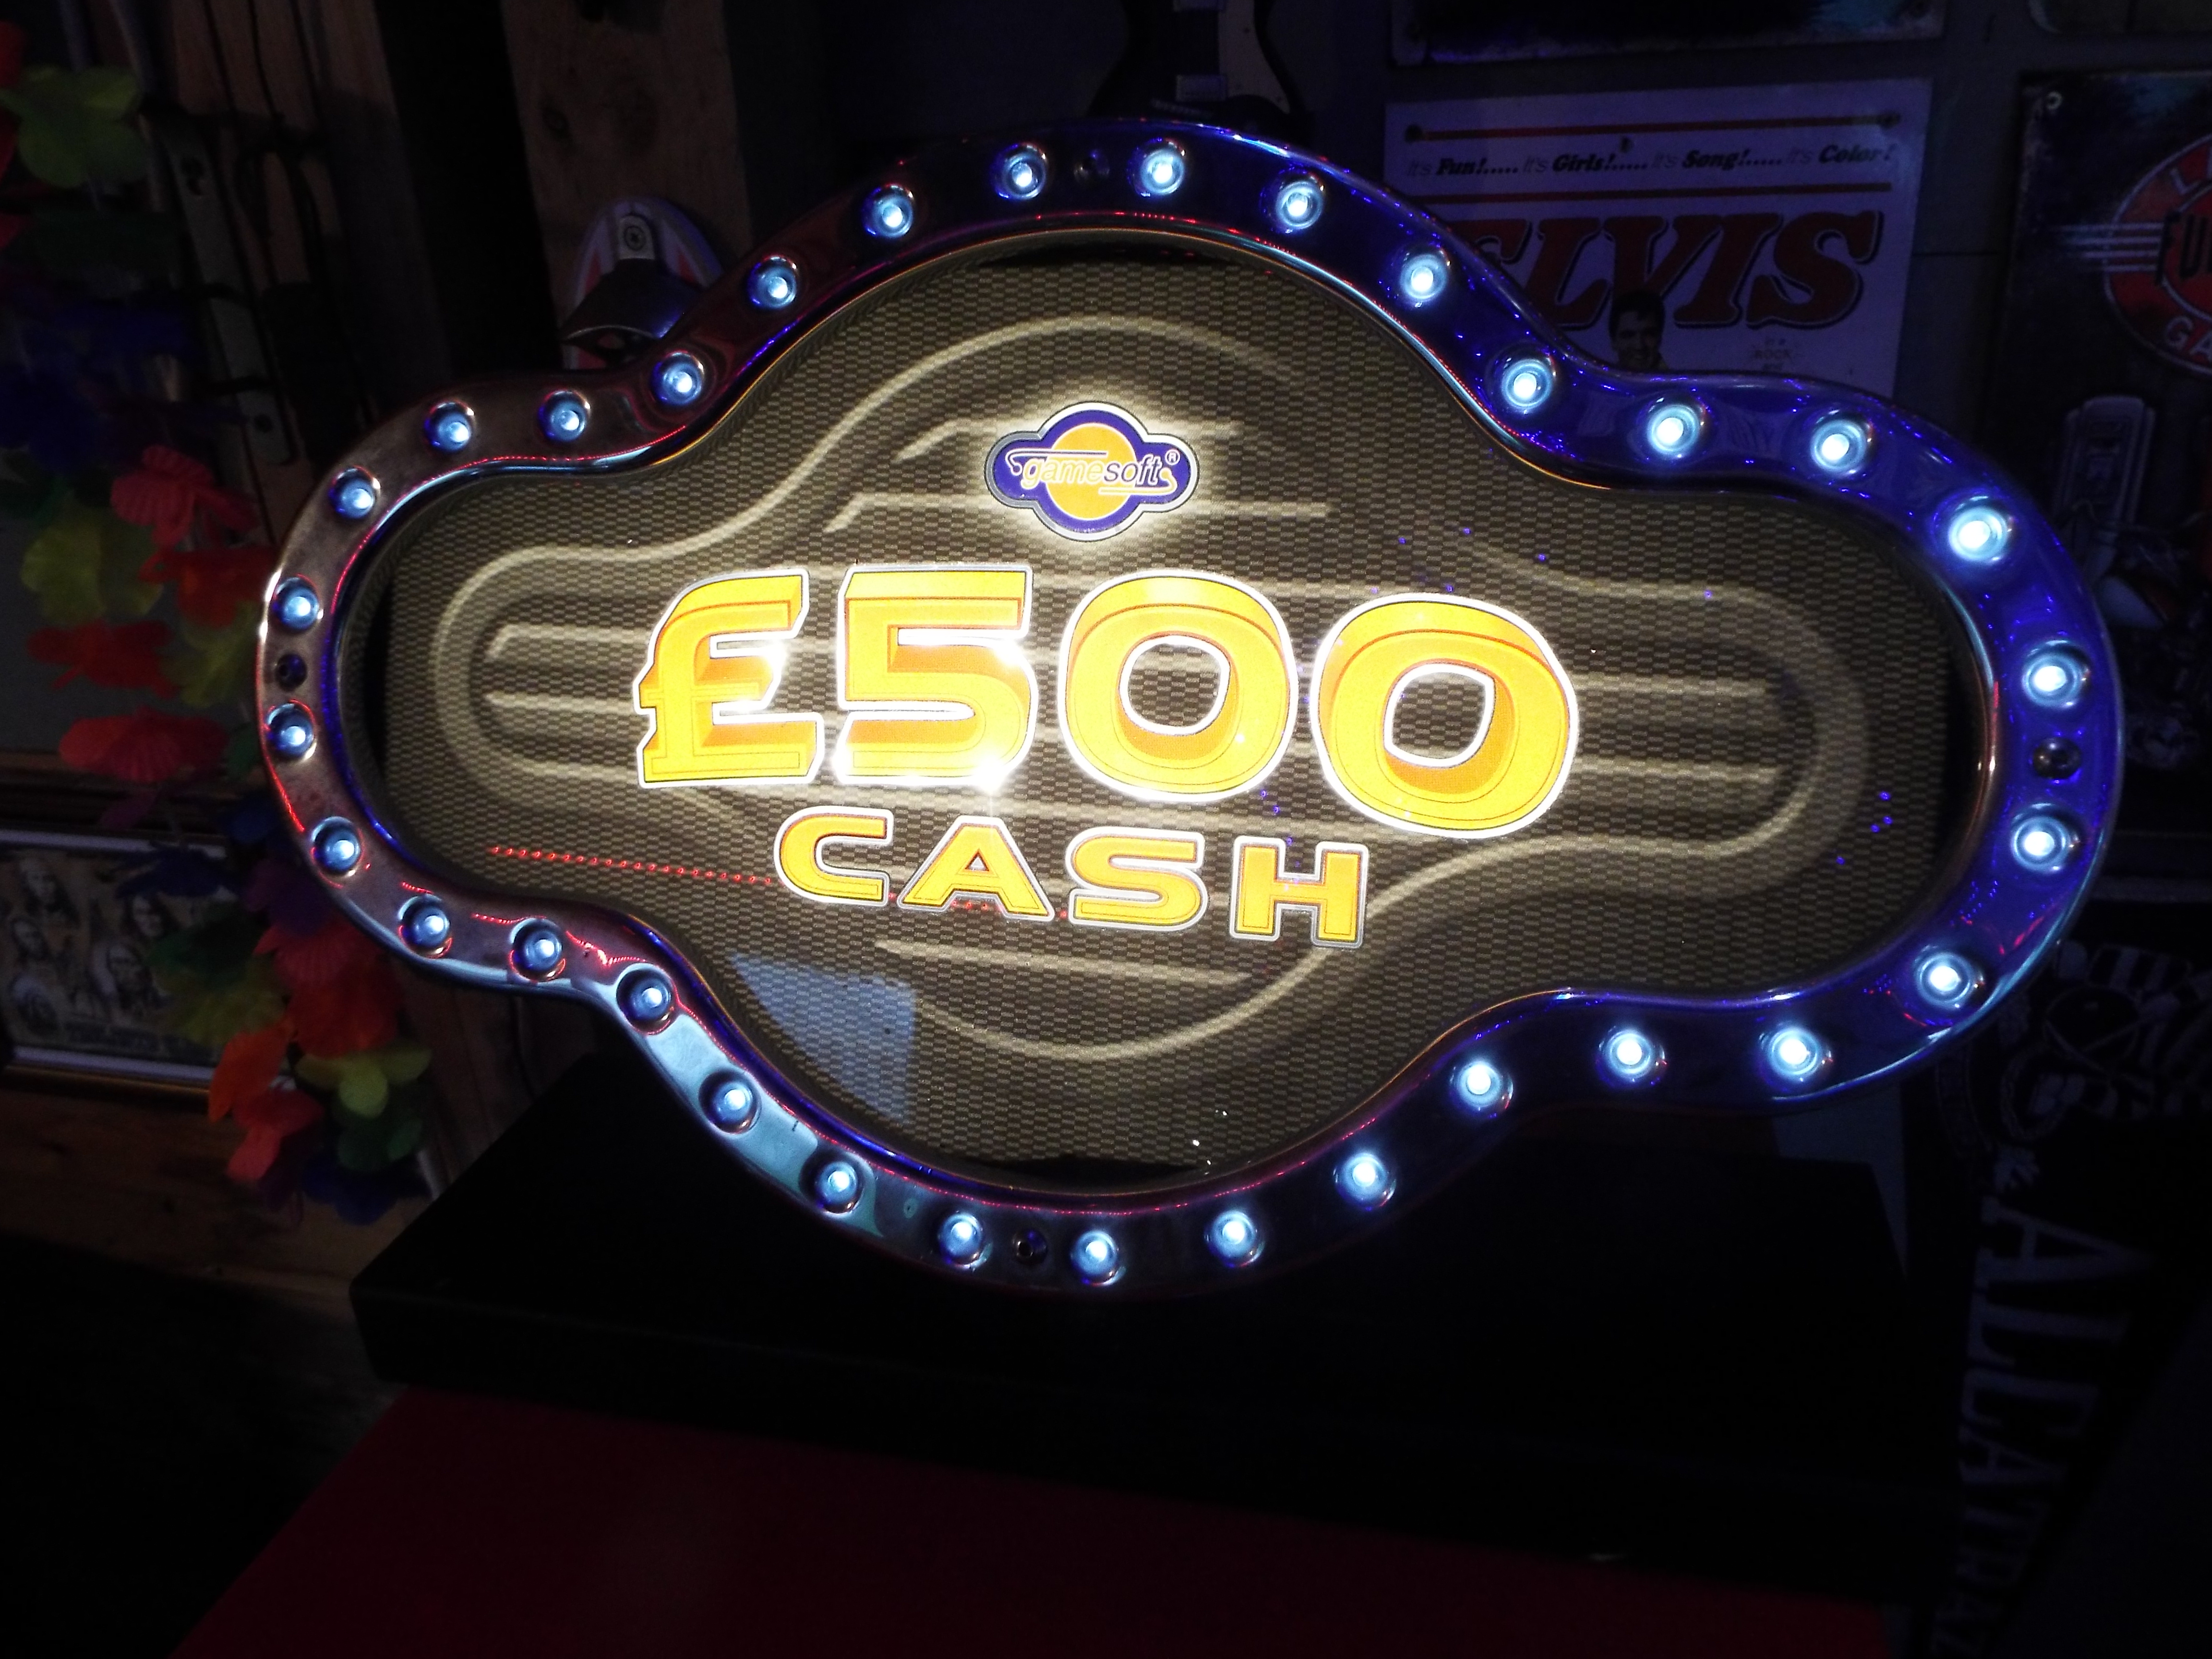 Fruit Machine illuminated sign - £500 Cash - by 'Game Soft' in working order, - Image 2 of 3